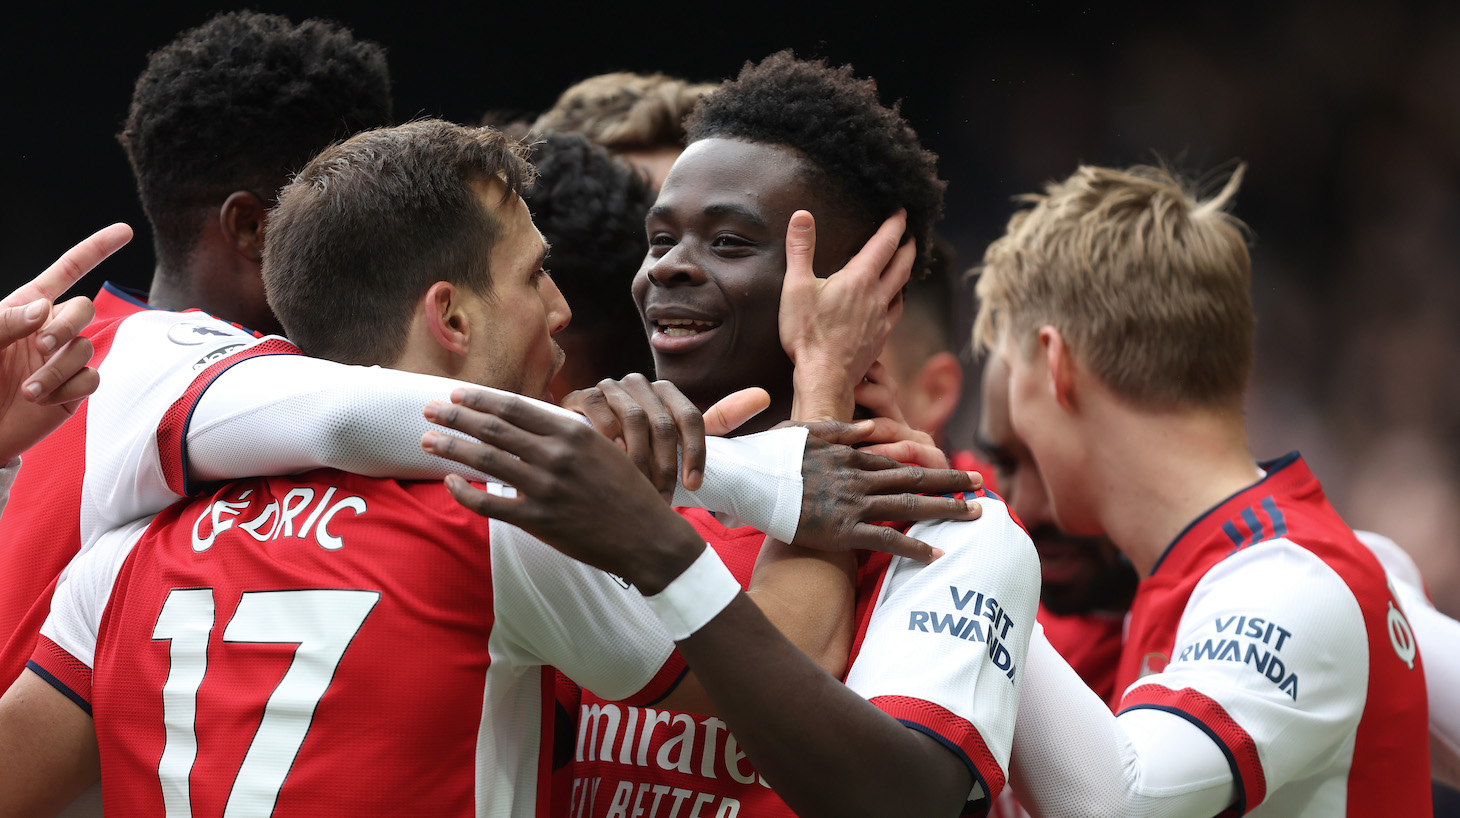 Bukayo Saka of Arsenal celebrates with (out of frame) Gabriel Martinelli of Arsenal after he scored during the Premier League match between Watford and Arsenal at Vicarage Road on March 06, 2022 in Watford, England.